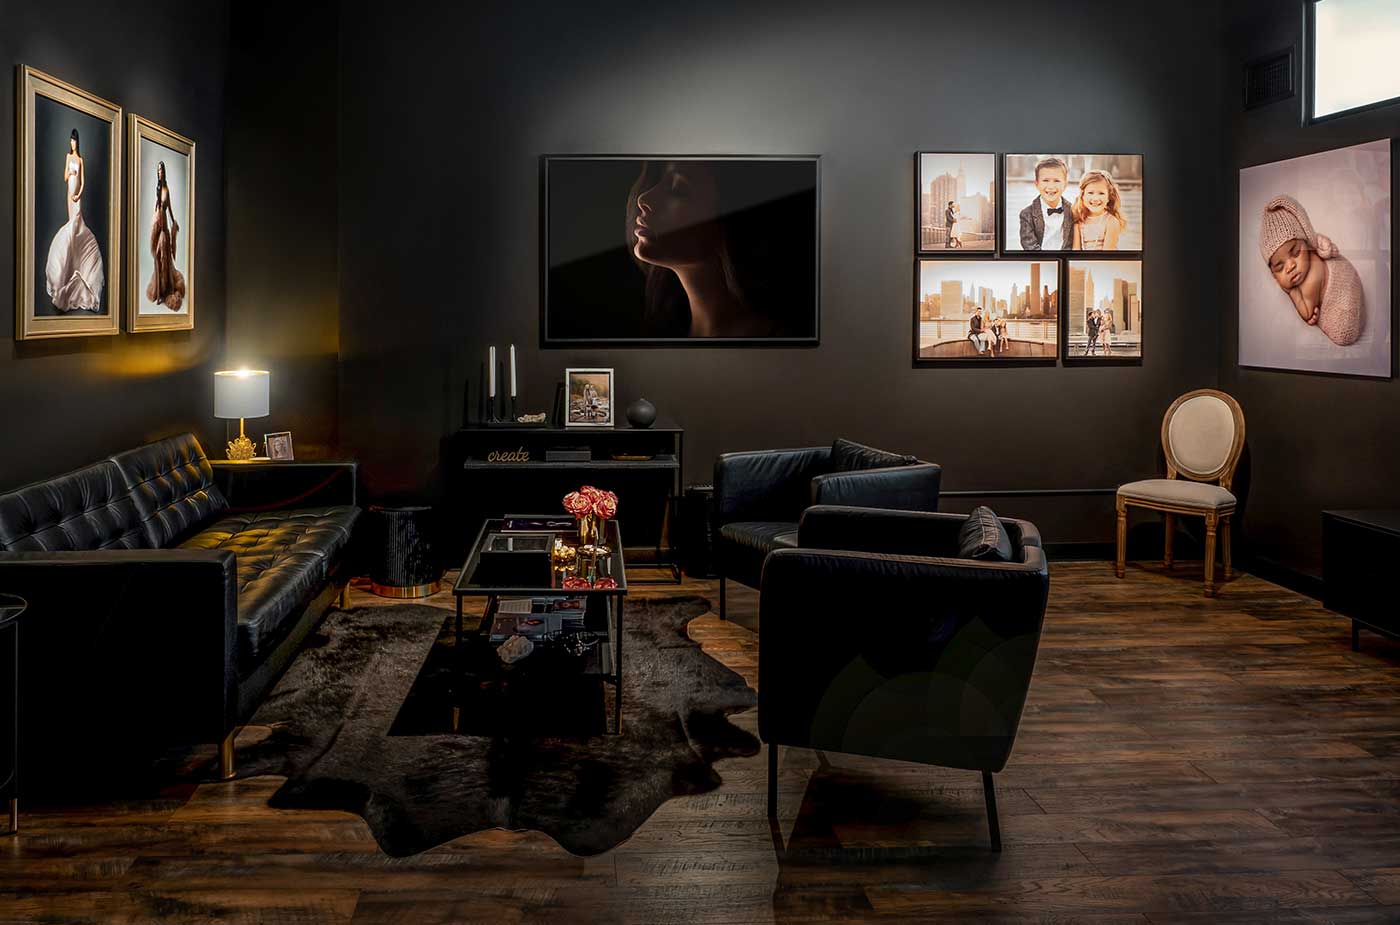 Reception area of a photography studio. A black leather couch with a glass coffee table dominates the scene. The walls are painted black and feature a variety of maternity, newborn, and baby photographs tastefully framed.